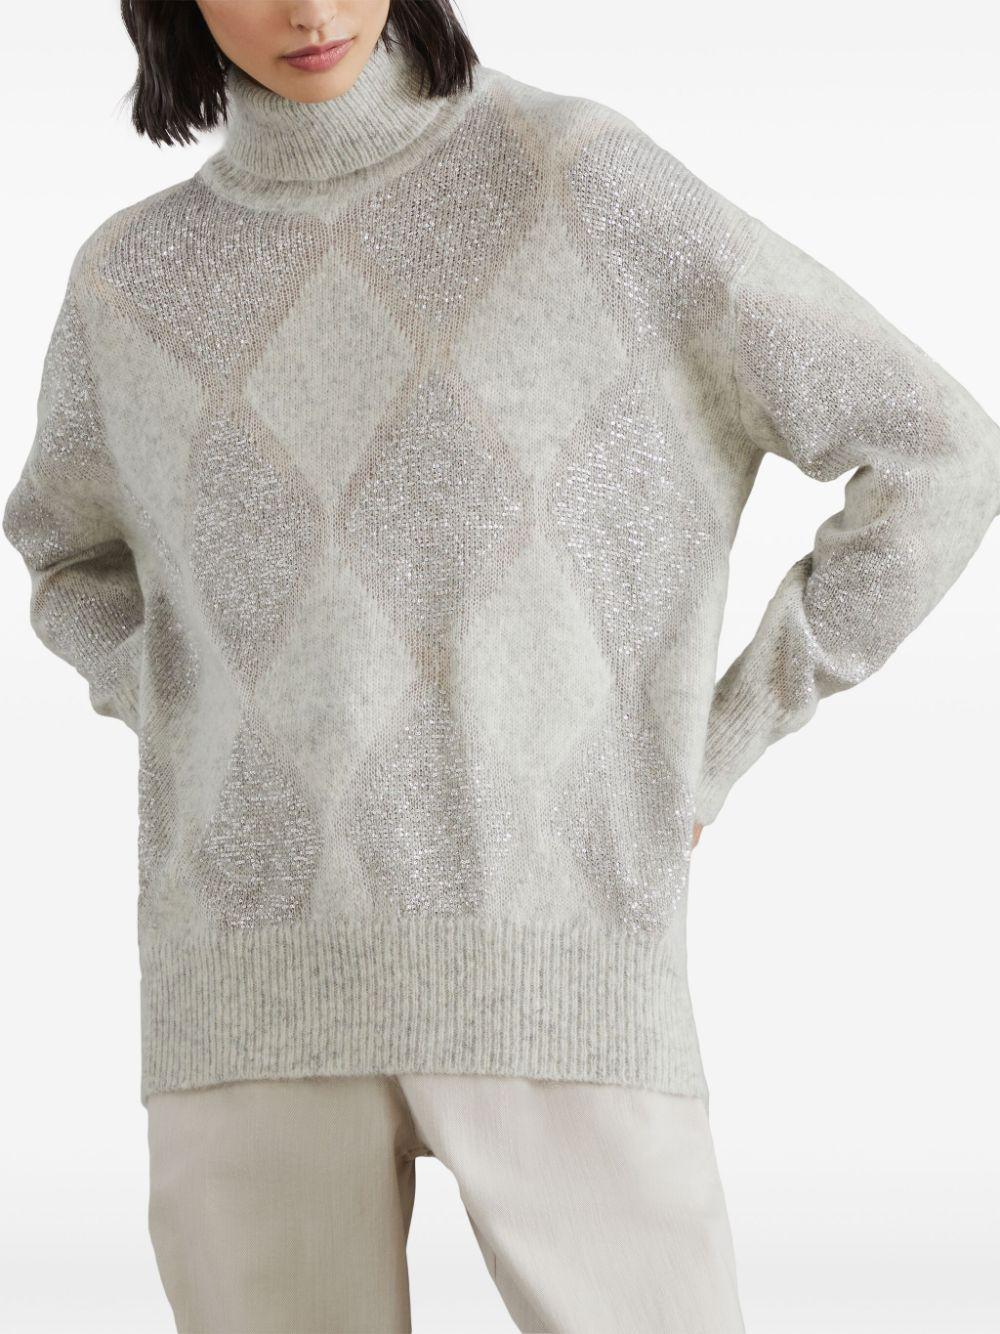 BRUNELLO CUCINELLI DAZZLING ARGYLE TURTLENECK SWEATER IN WOOL AND MOHAIR